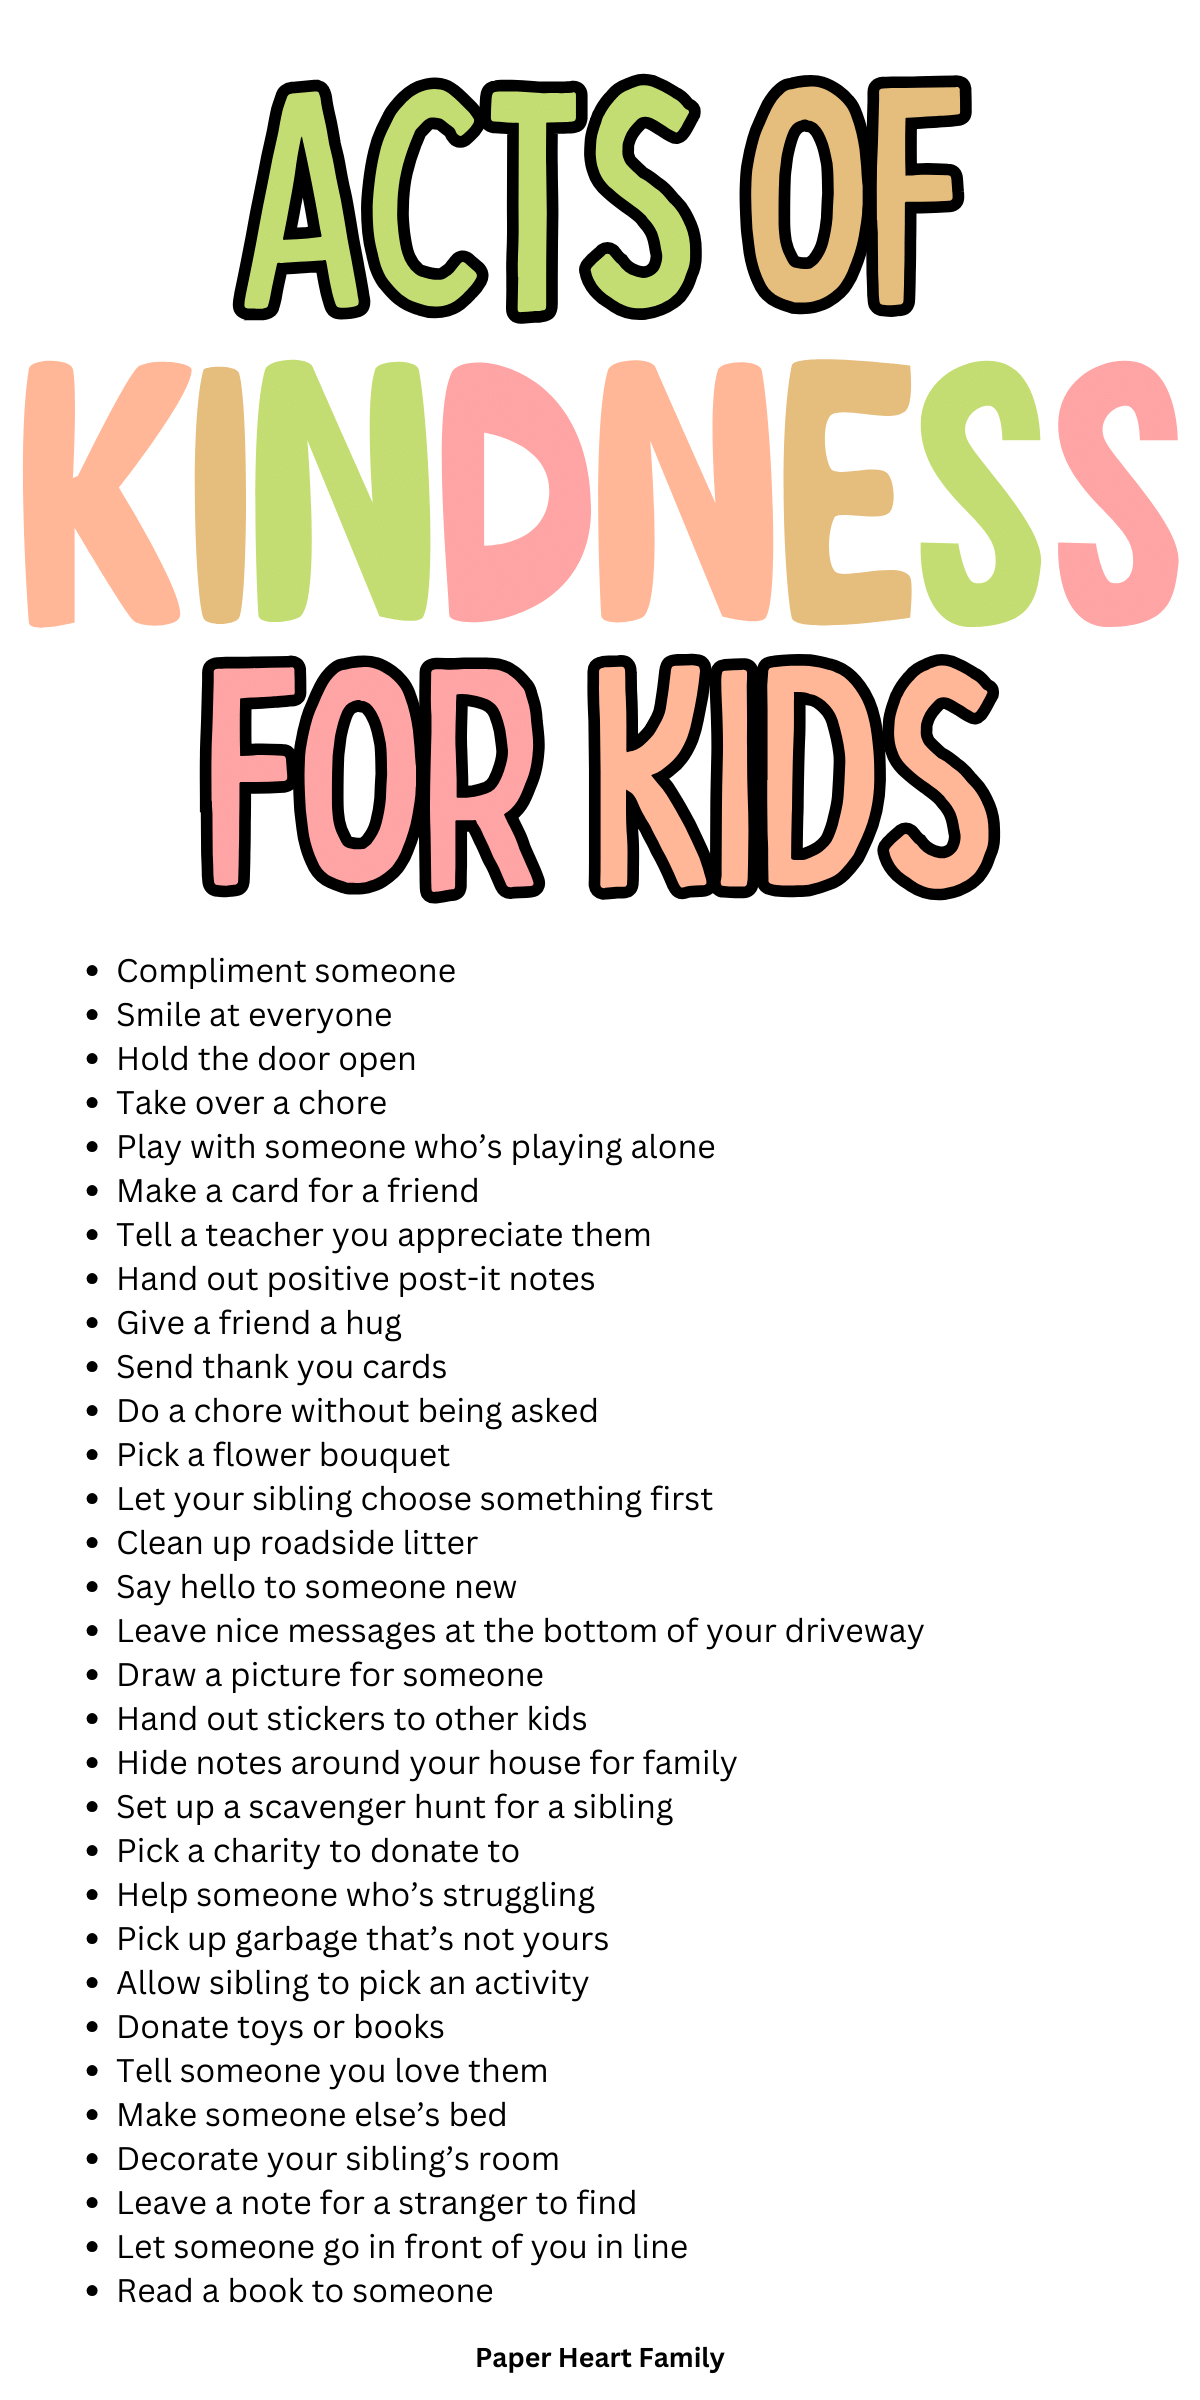 List of acts of kindness ideas for kids